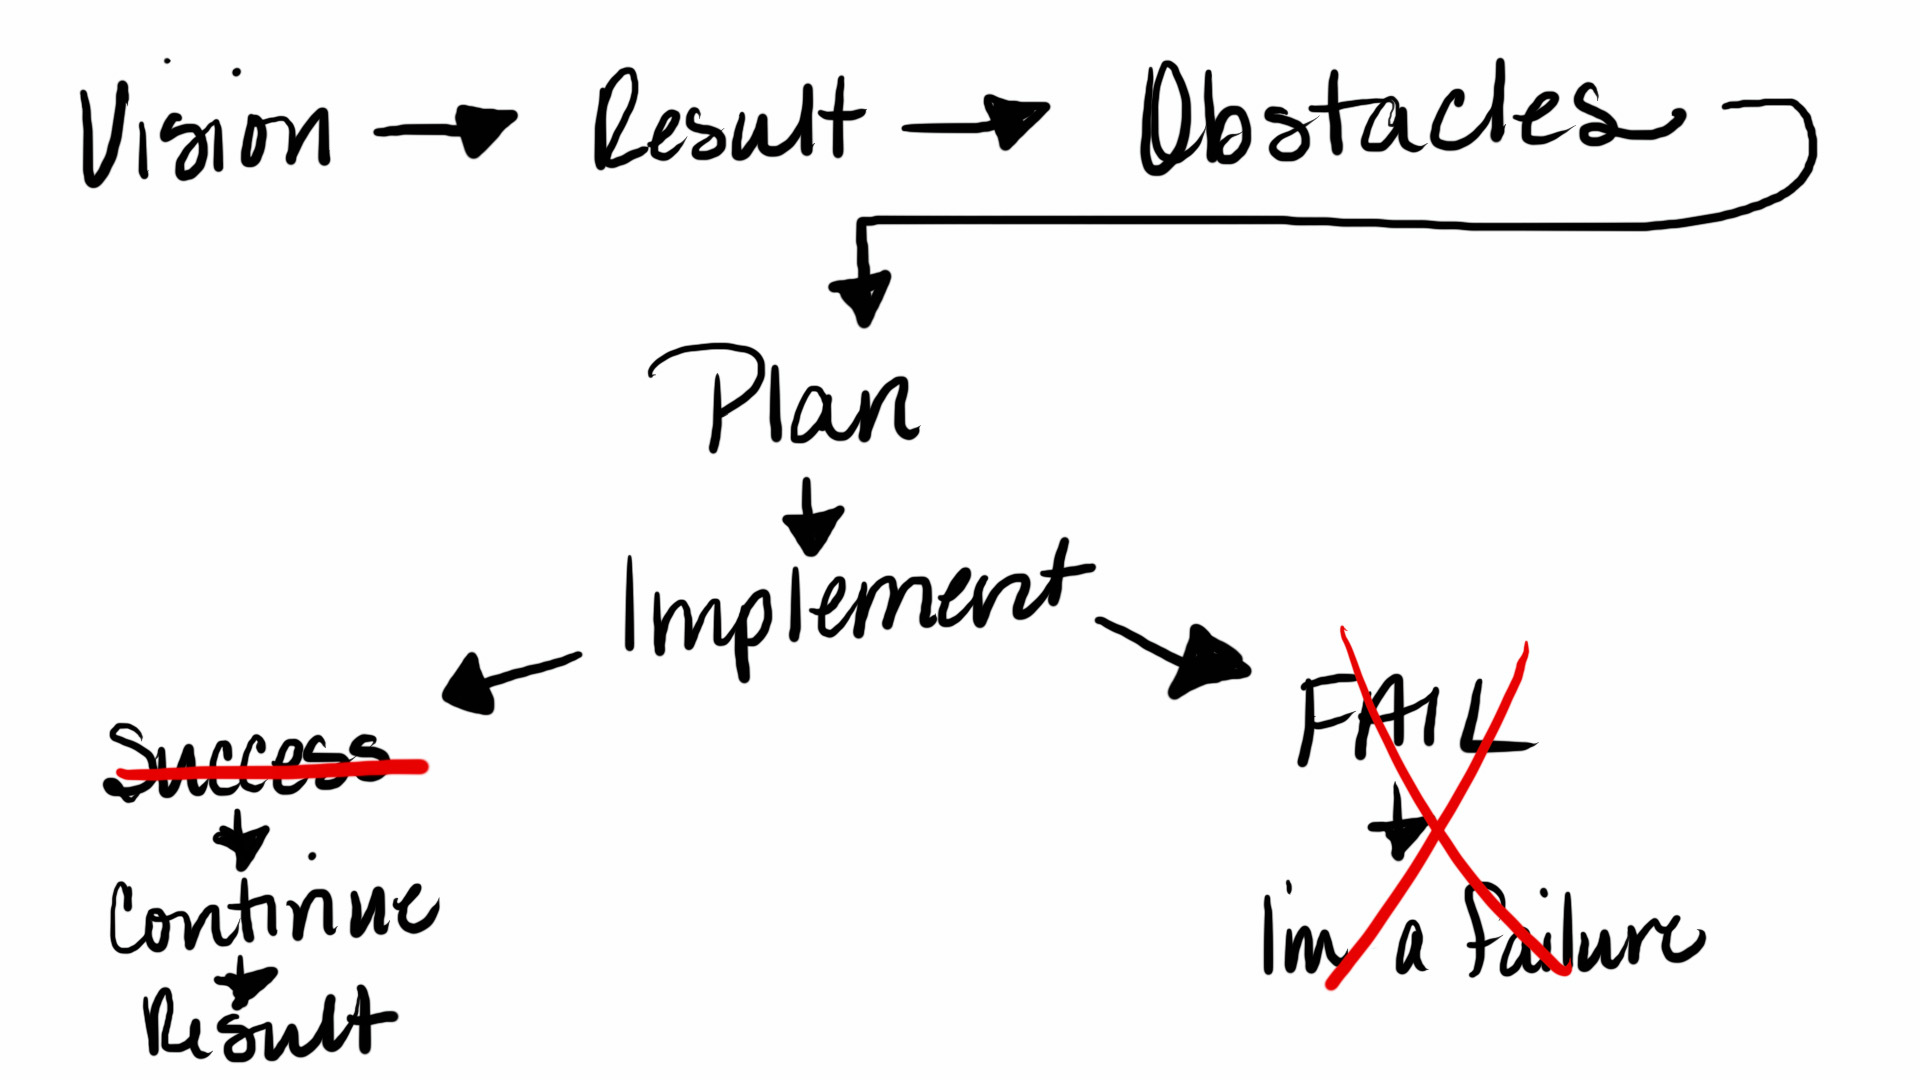 flow chart of vision - result - obstacles - plan - implement - success and fail